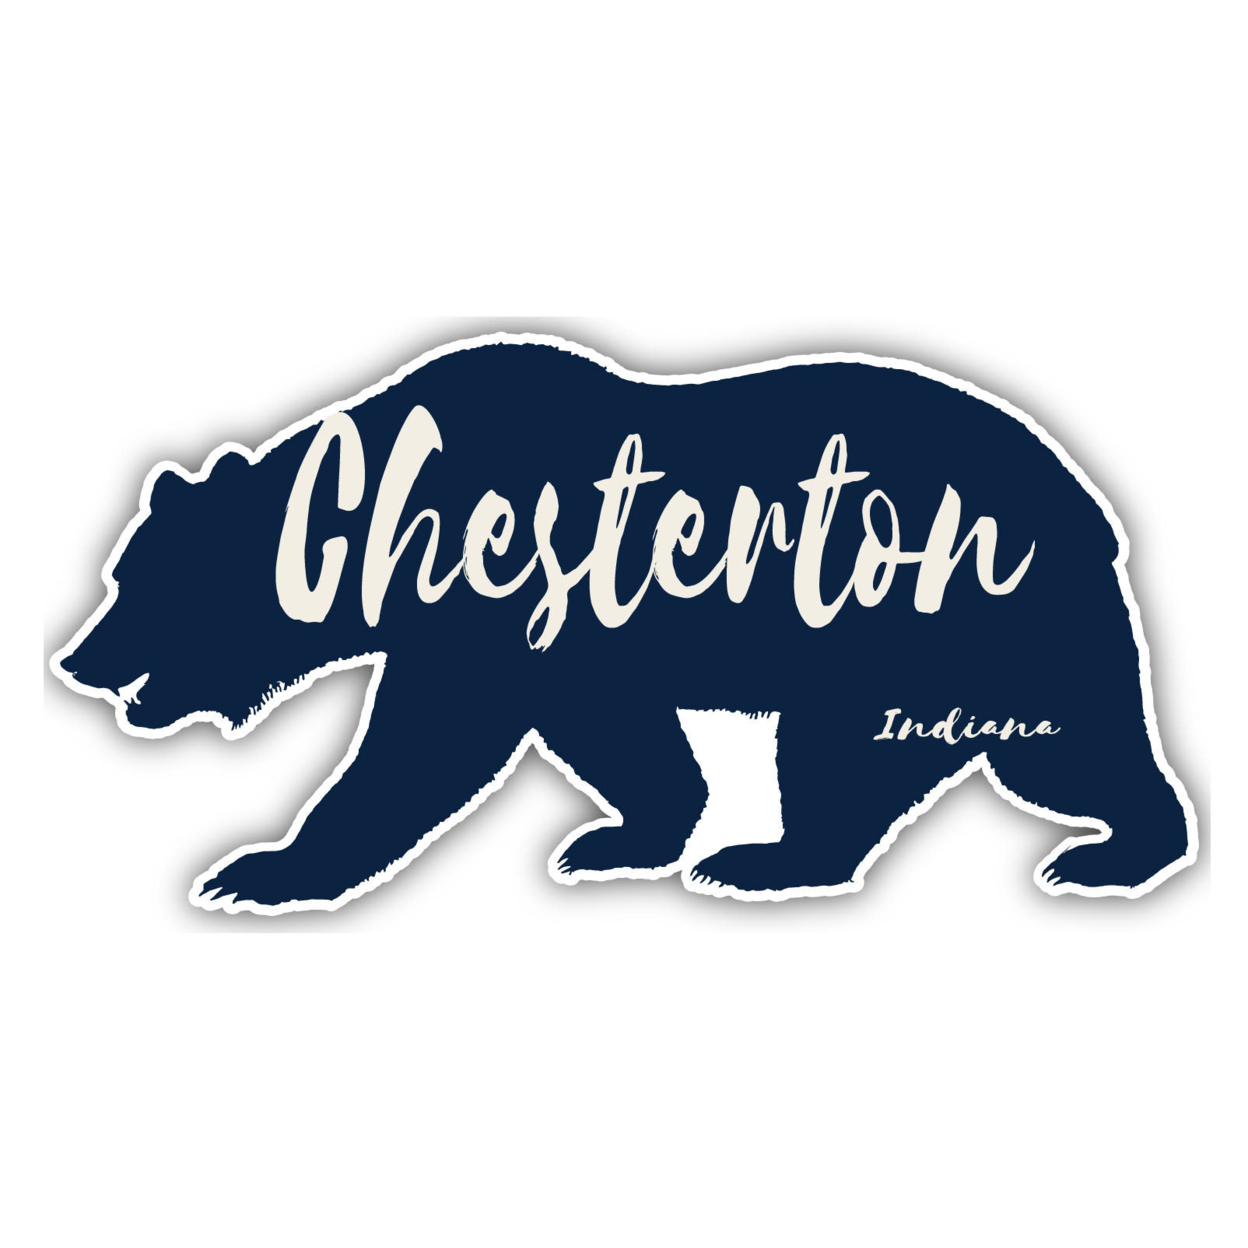 Chesterton Indiana Souvenir Decorative Stickers (Choose Theme And Size) - 4-Pack, 12-Inch, Adventures Awaits